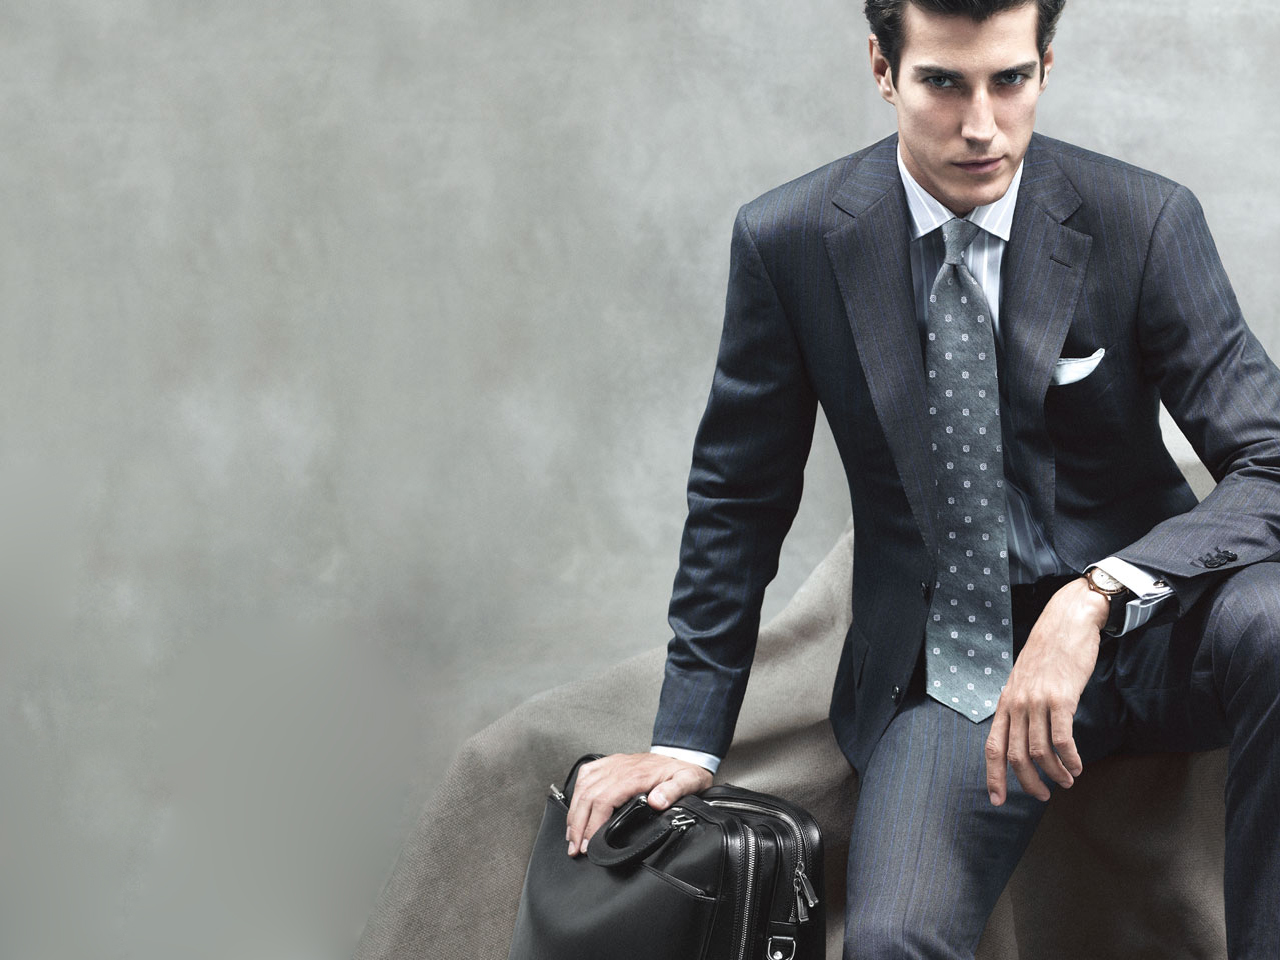 Suit Inspiration - Inspiration for style, suits and classic elegance